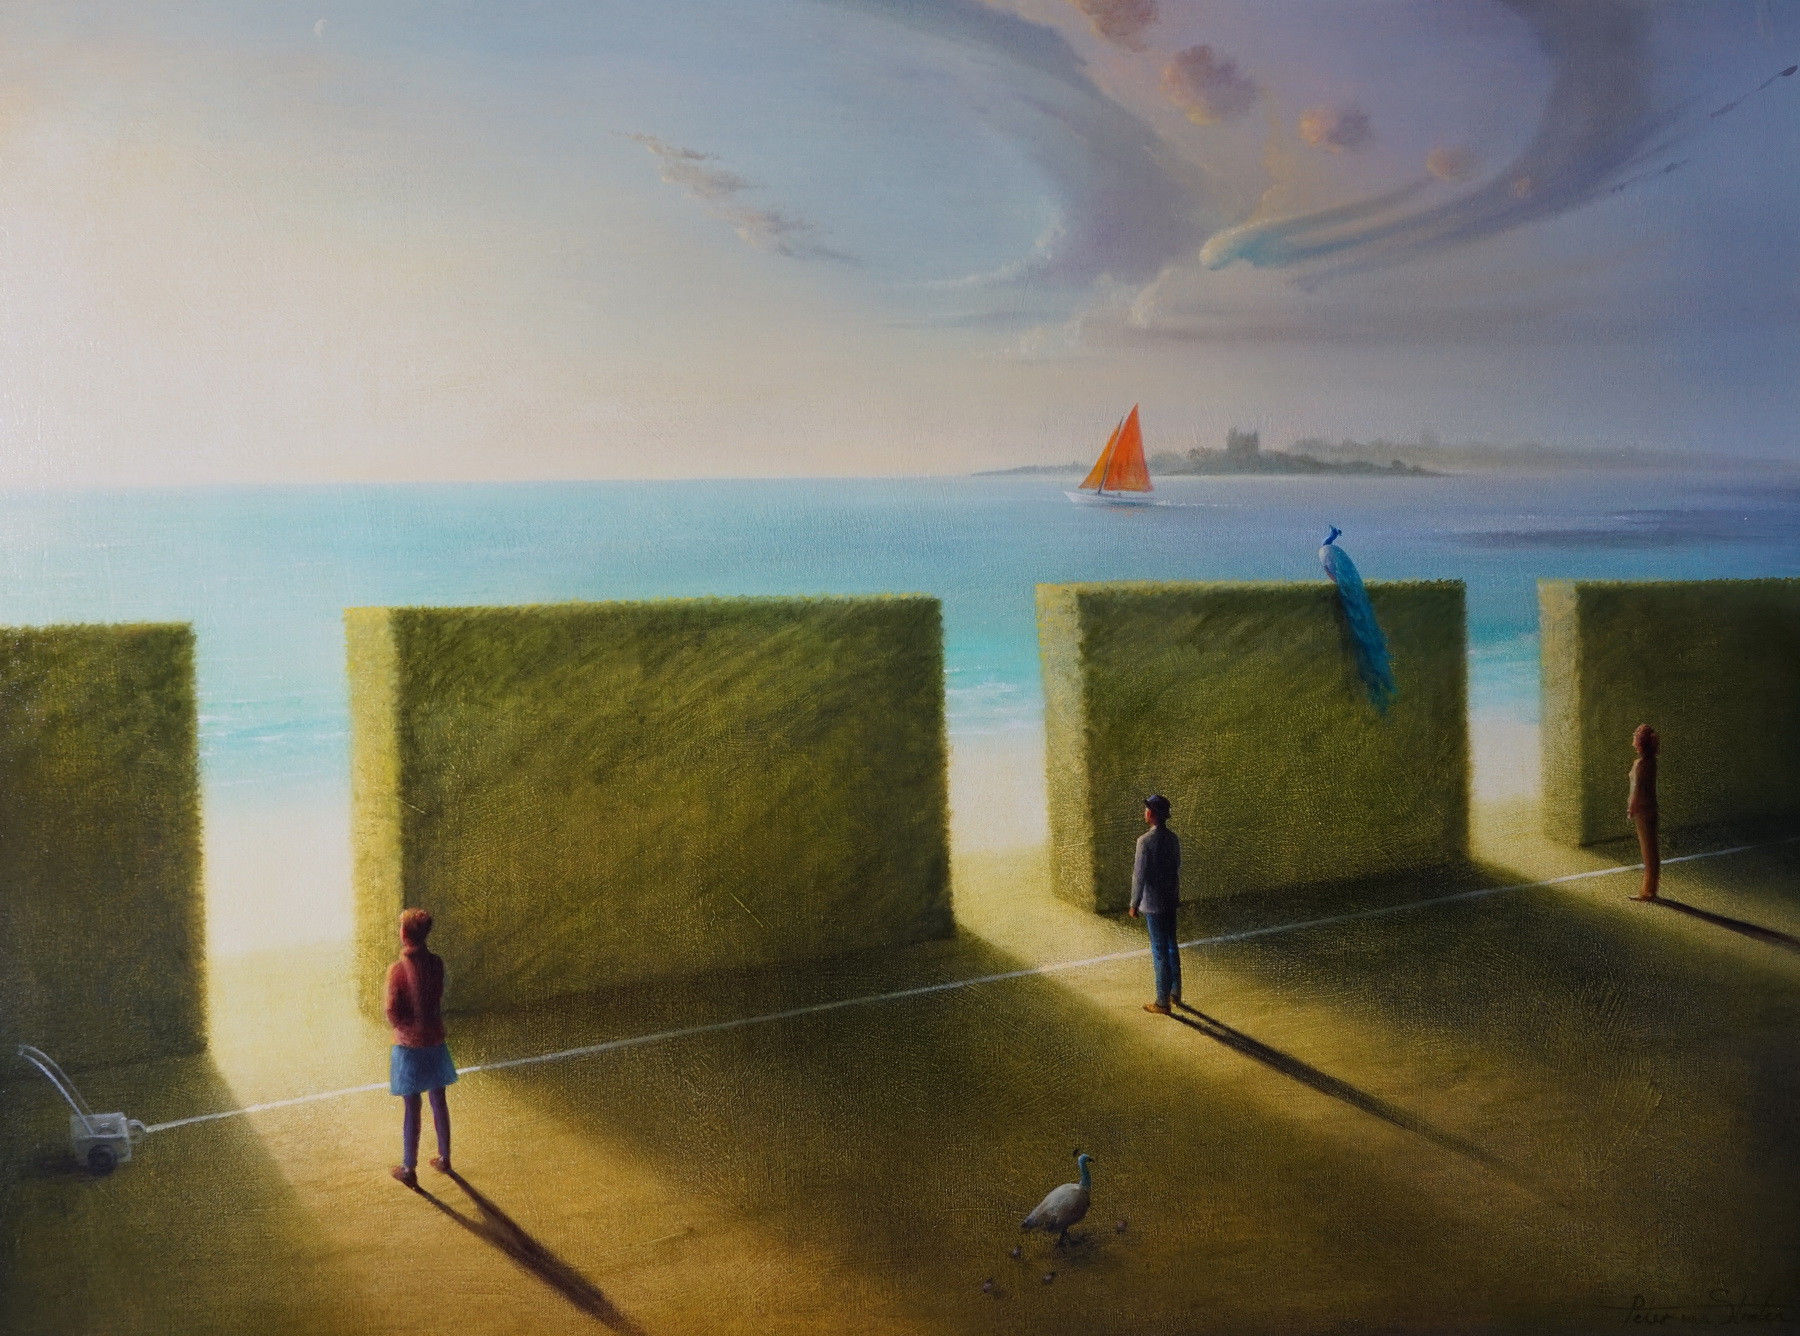  Want to buy a magical realistic painting? See also the painting by Peter van Straten, 'The Line, 2020 (90 x 120 x 3 cm).